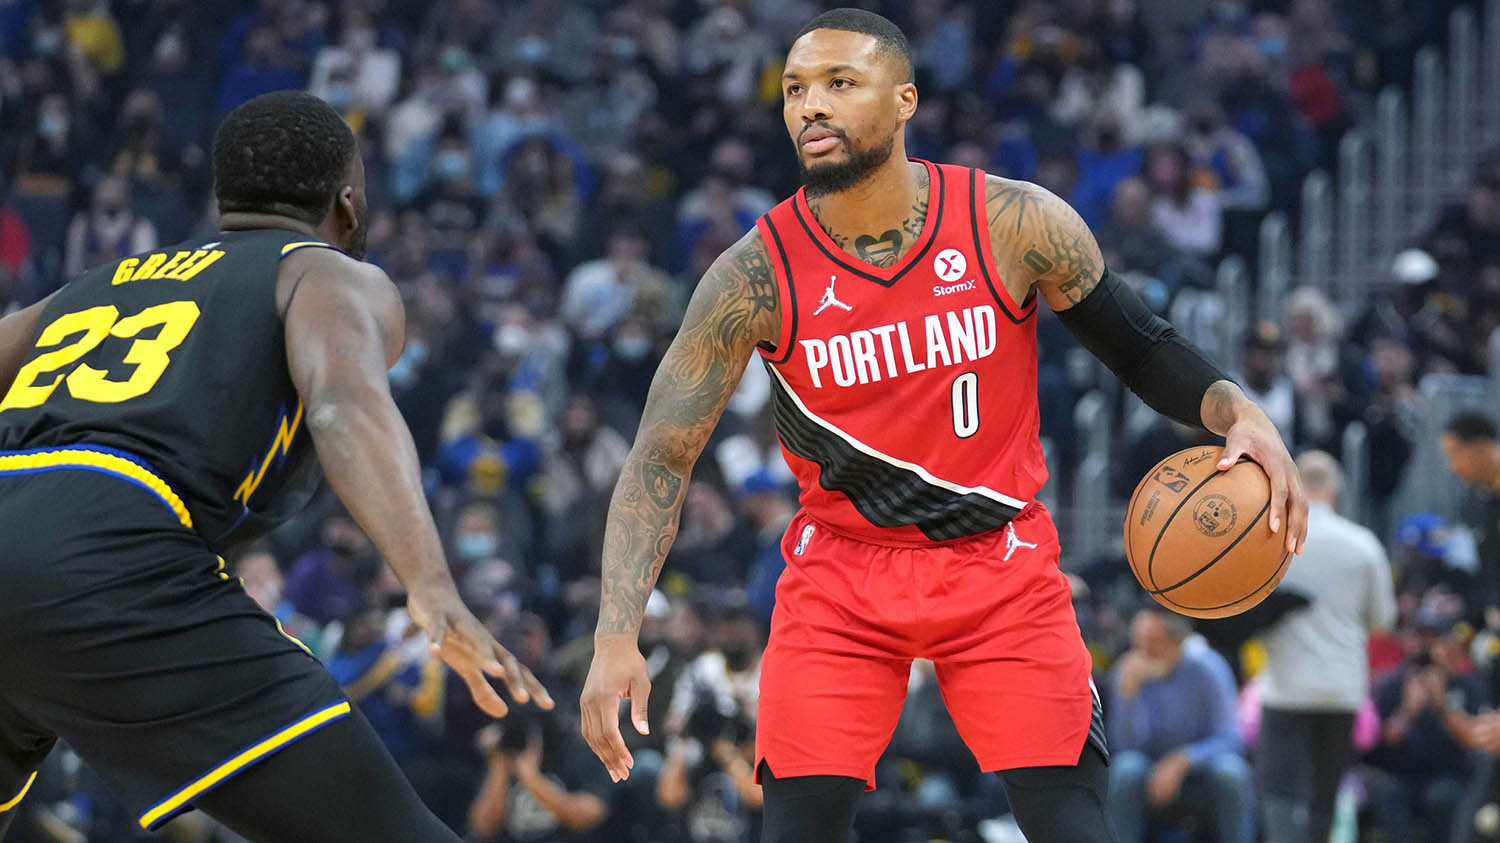 Blazers News: Portland Reportedly Had Interest in Trading for